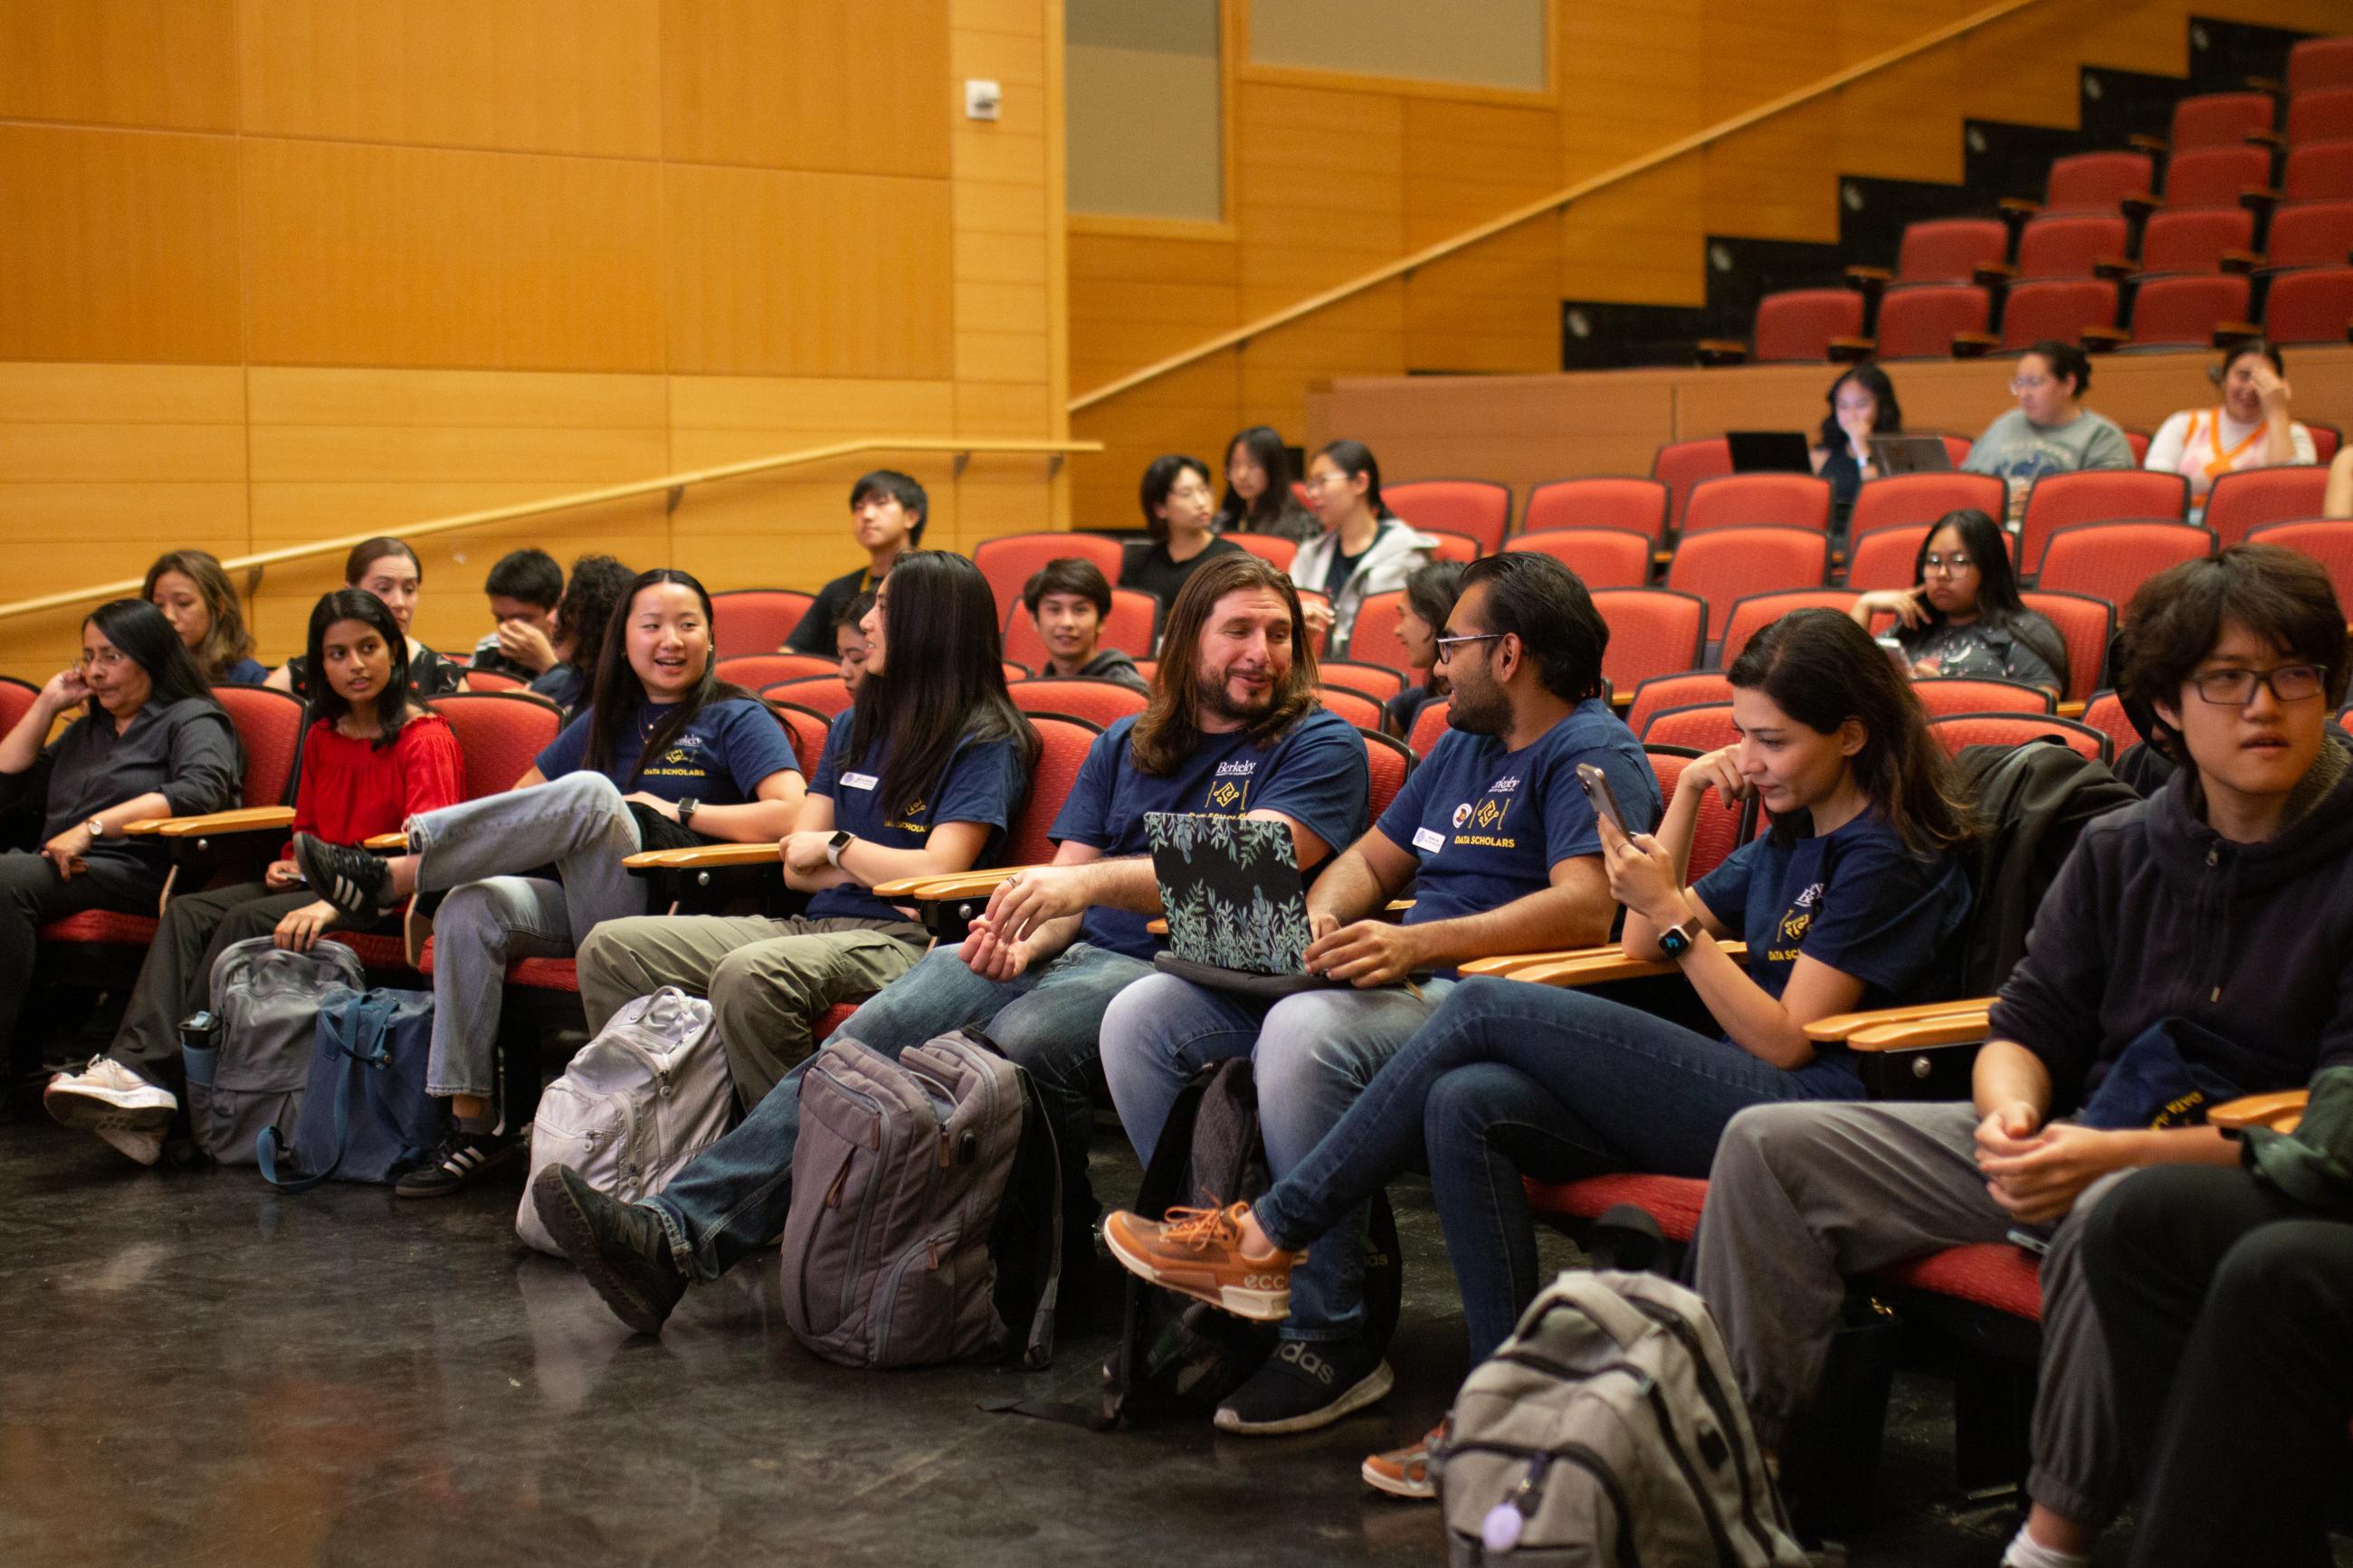 Students attend a data science event